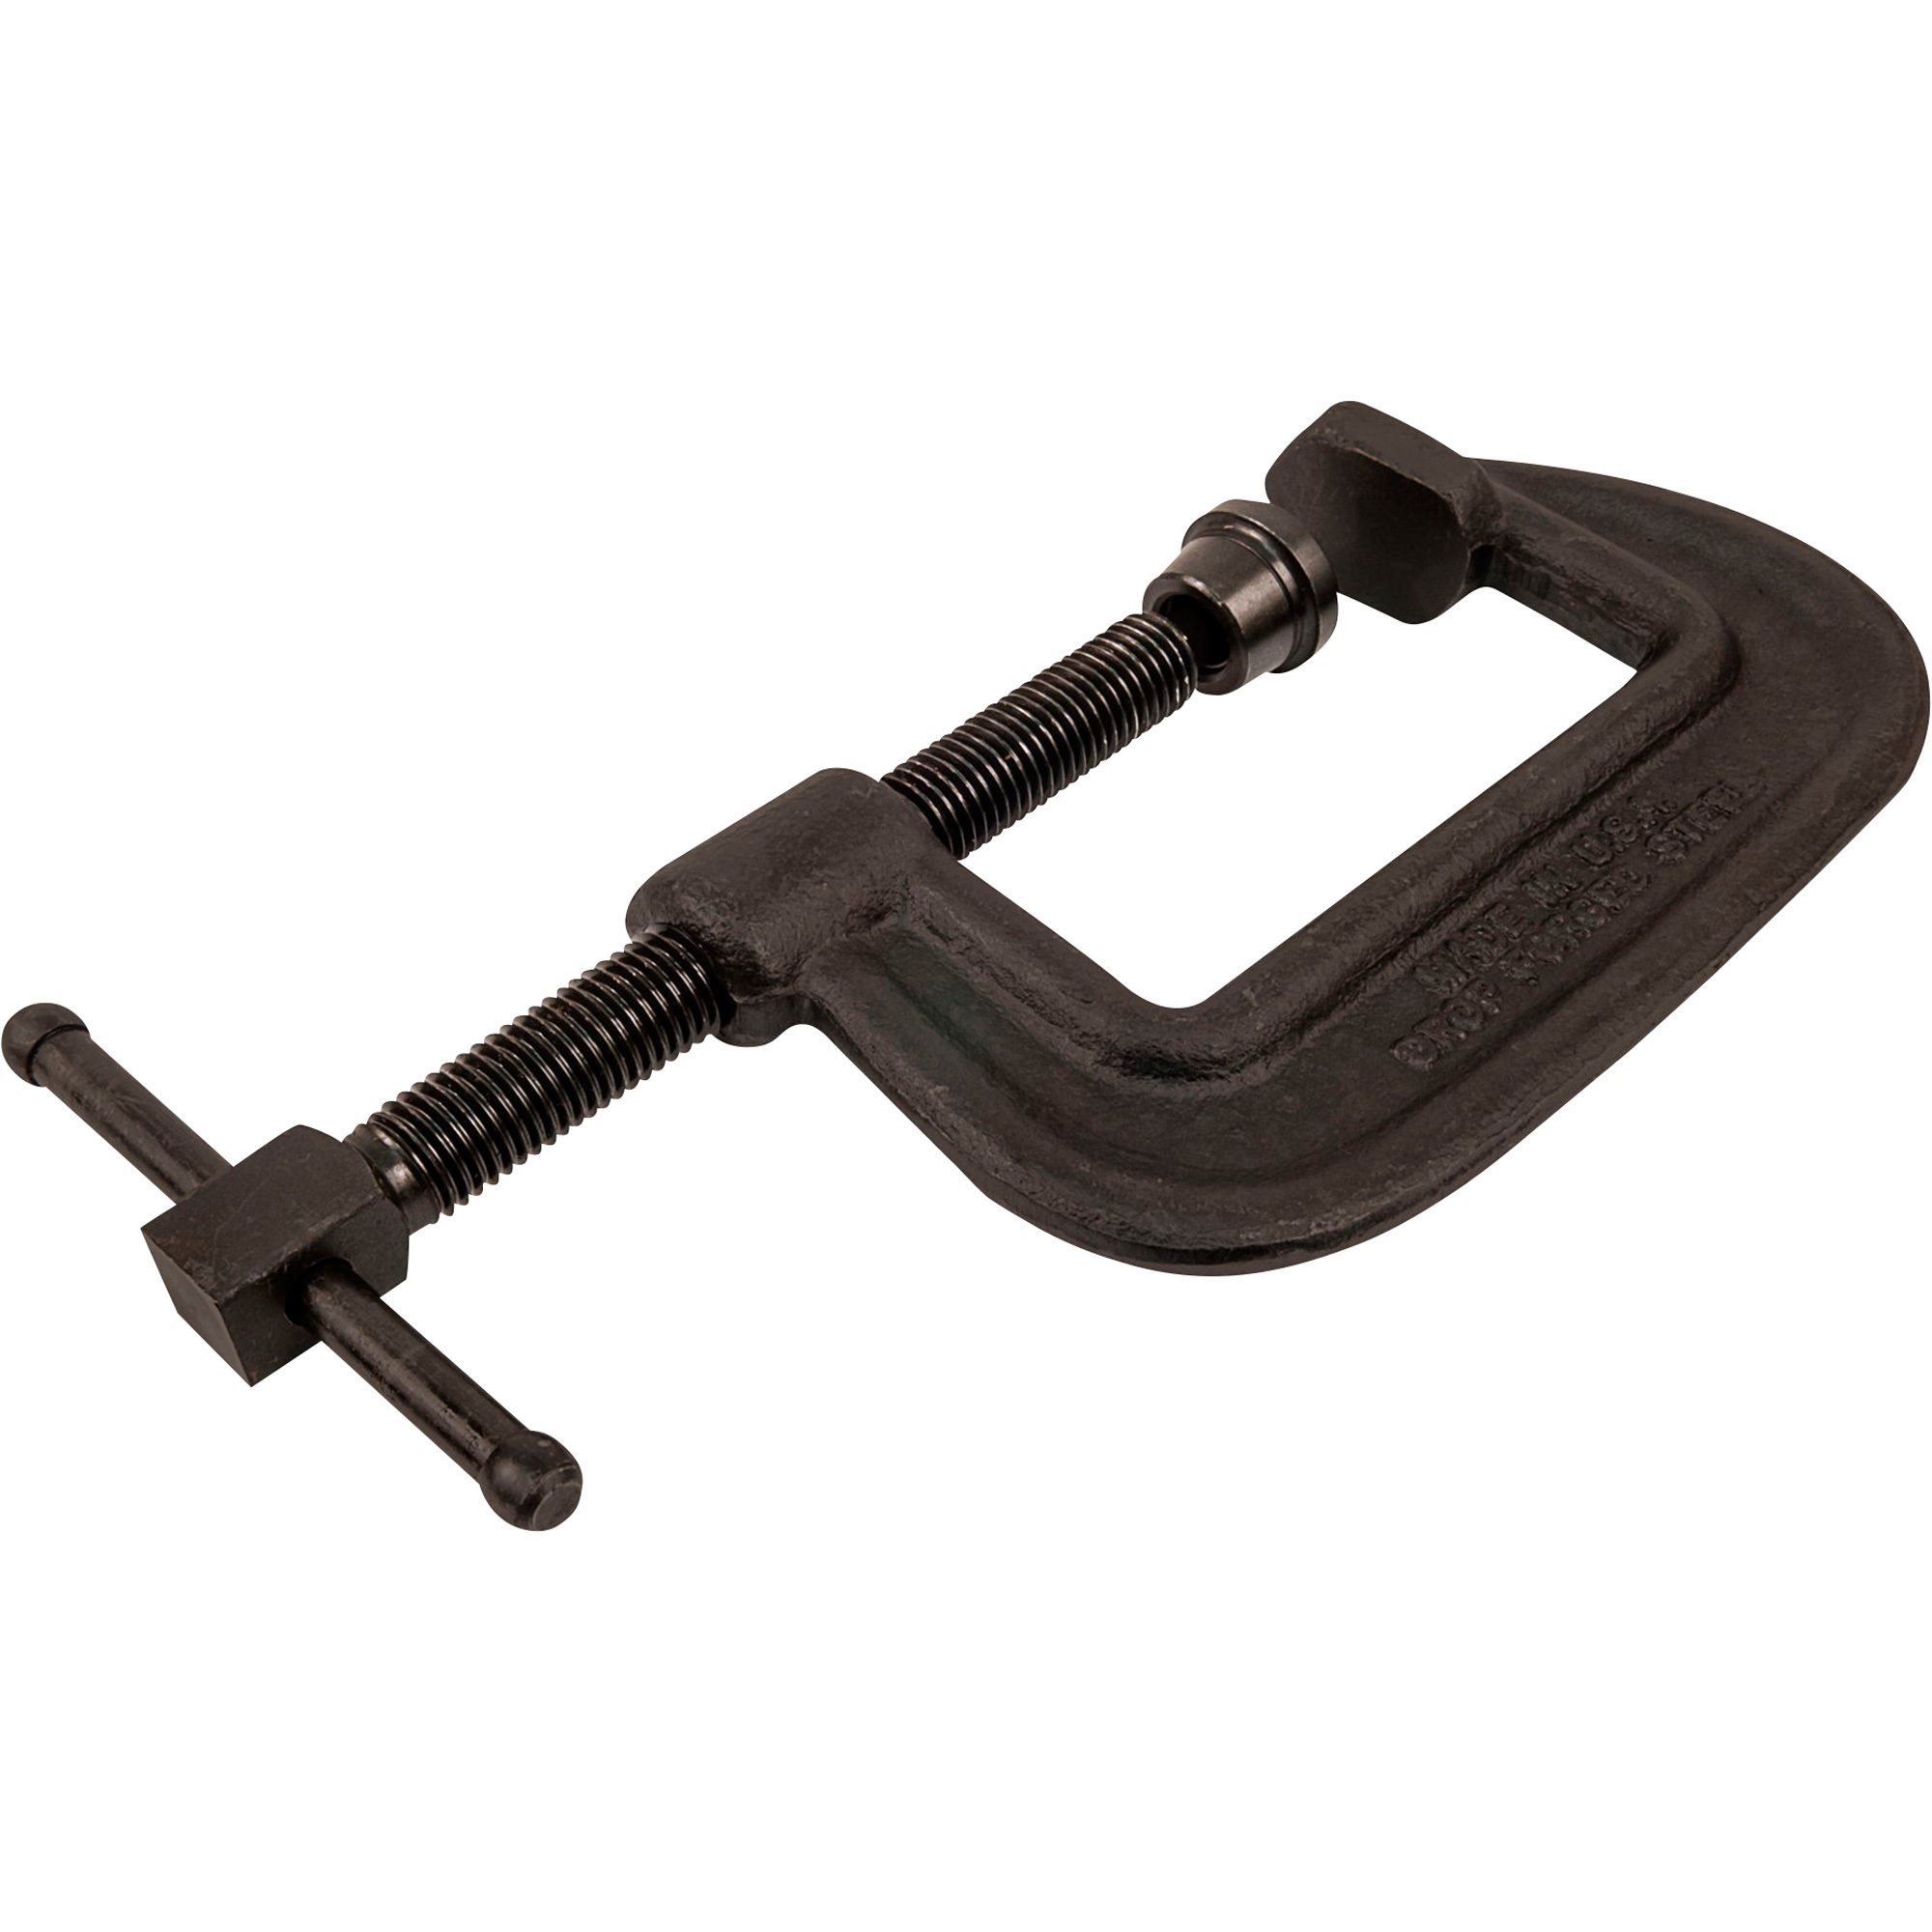 Wilton 100 Series Heavy-Duty Forged C-Clamp, 4-8Inch Opening, Model 108